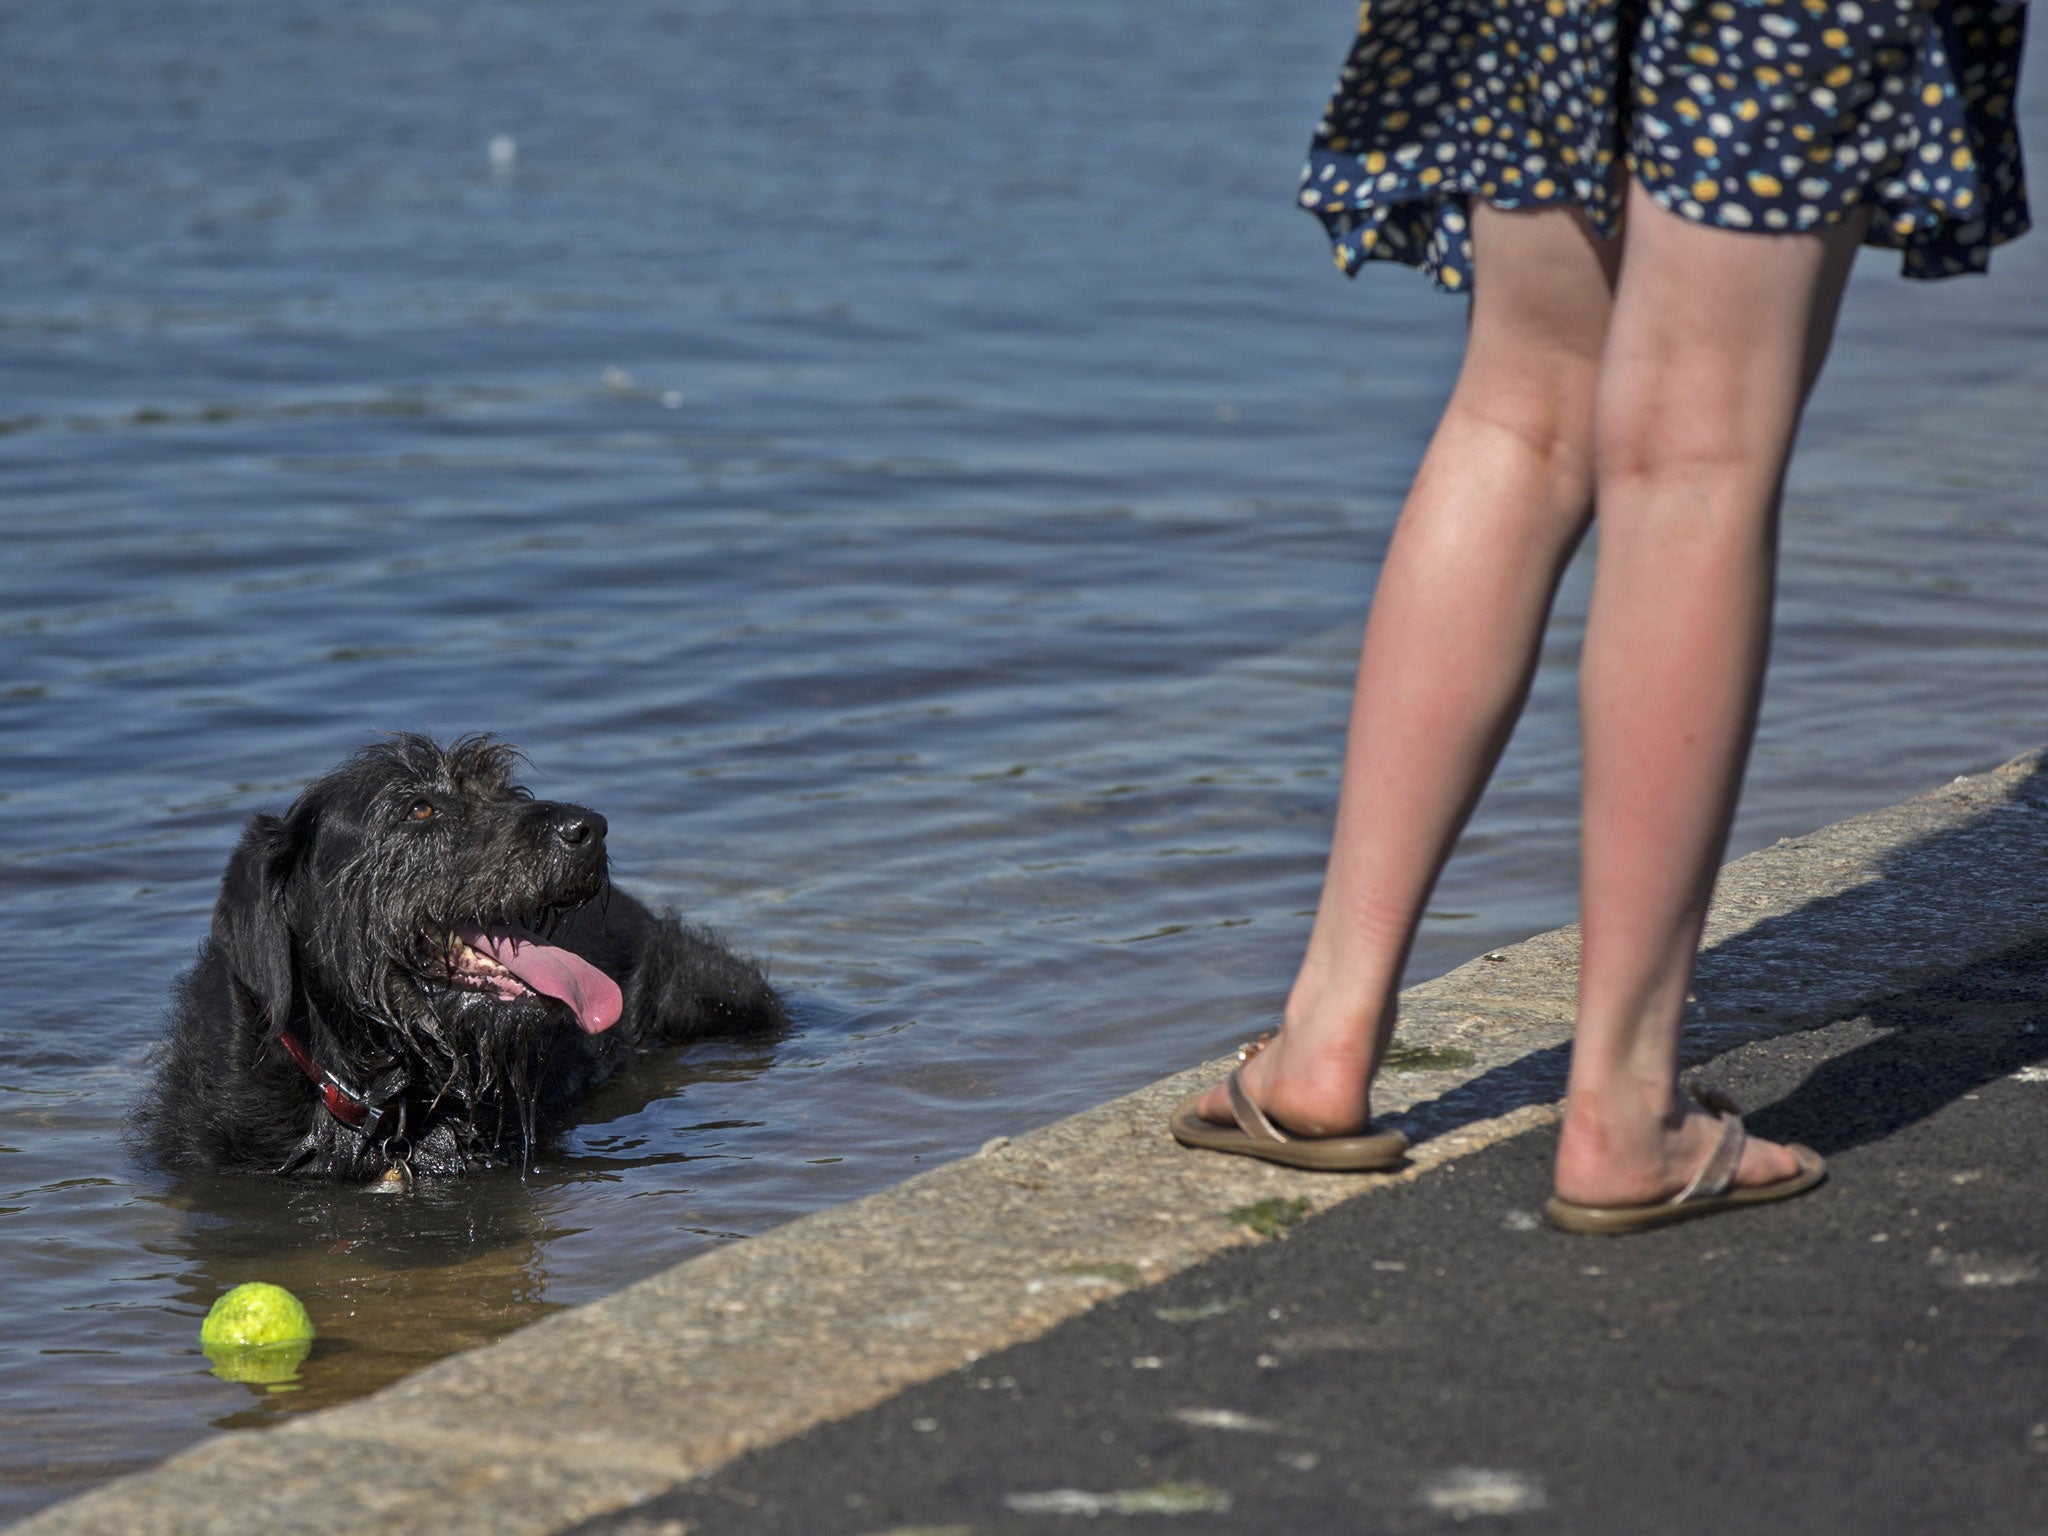 A dog cools off in Hyde Park's Round Pond in warm weather on July 3, 2014 in London, England. Southern England has recorded the highest temperature of the year so far at 27.7C (81.8F) in Essex.